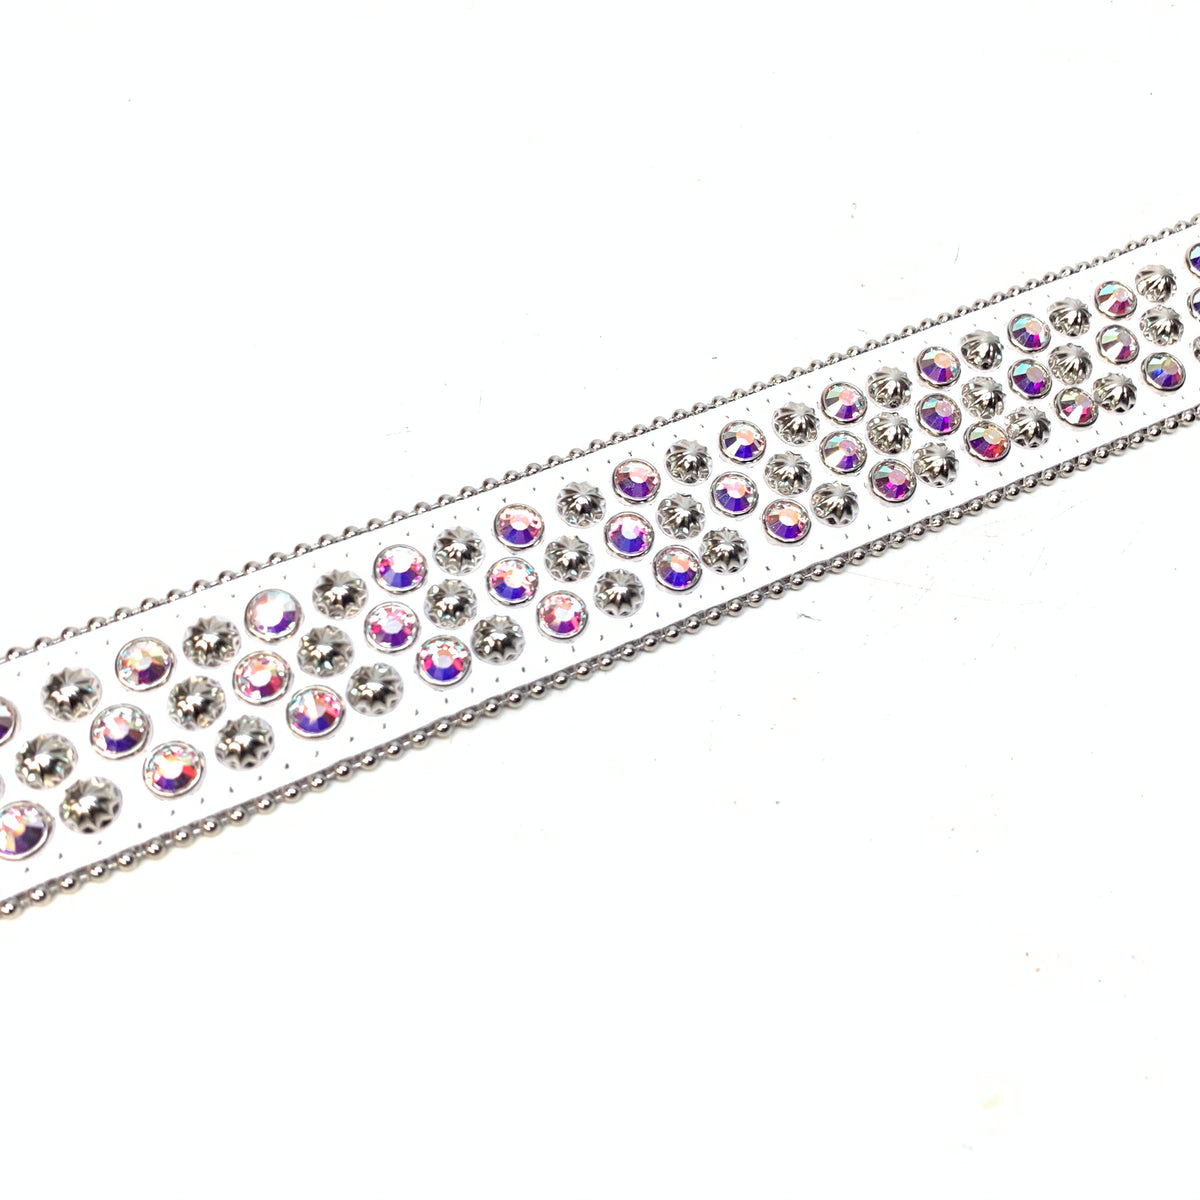 bb simon Leather Belt With 3 Rows Of Large Swarovski Crystals